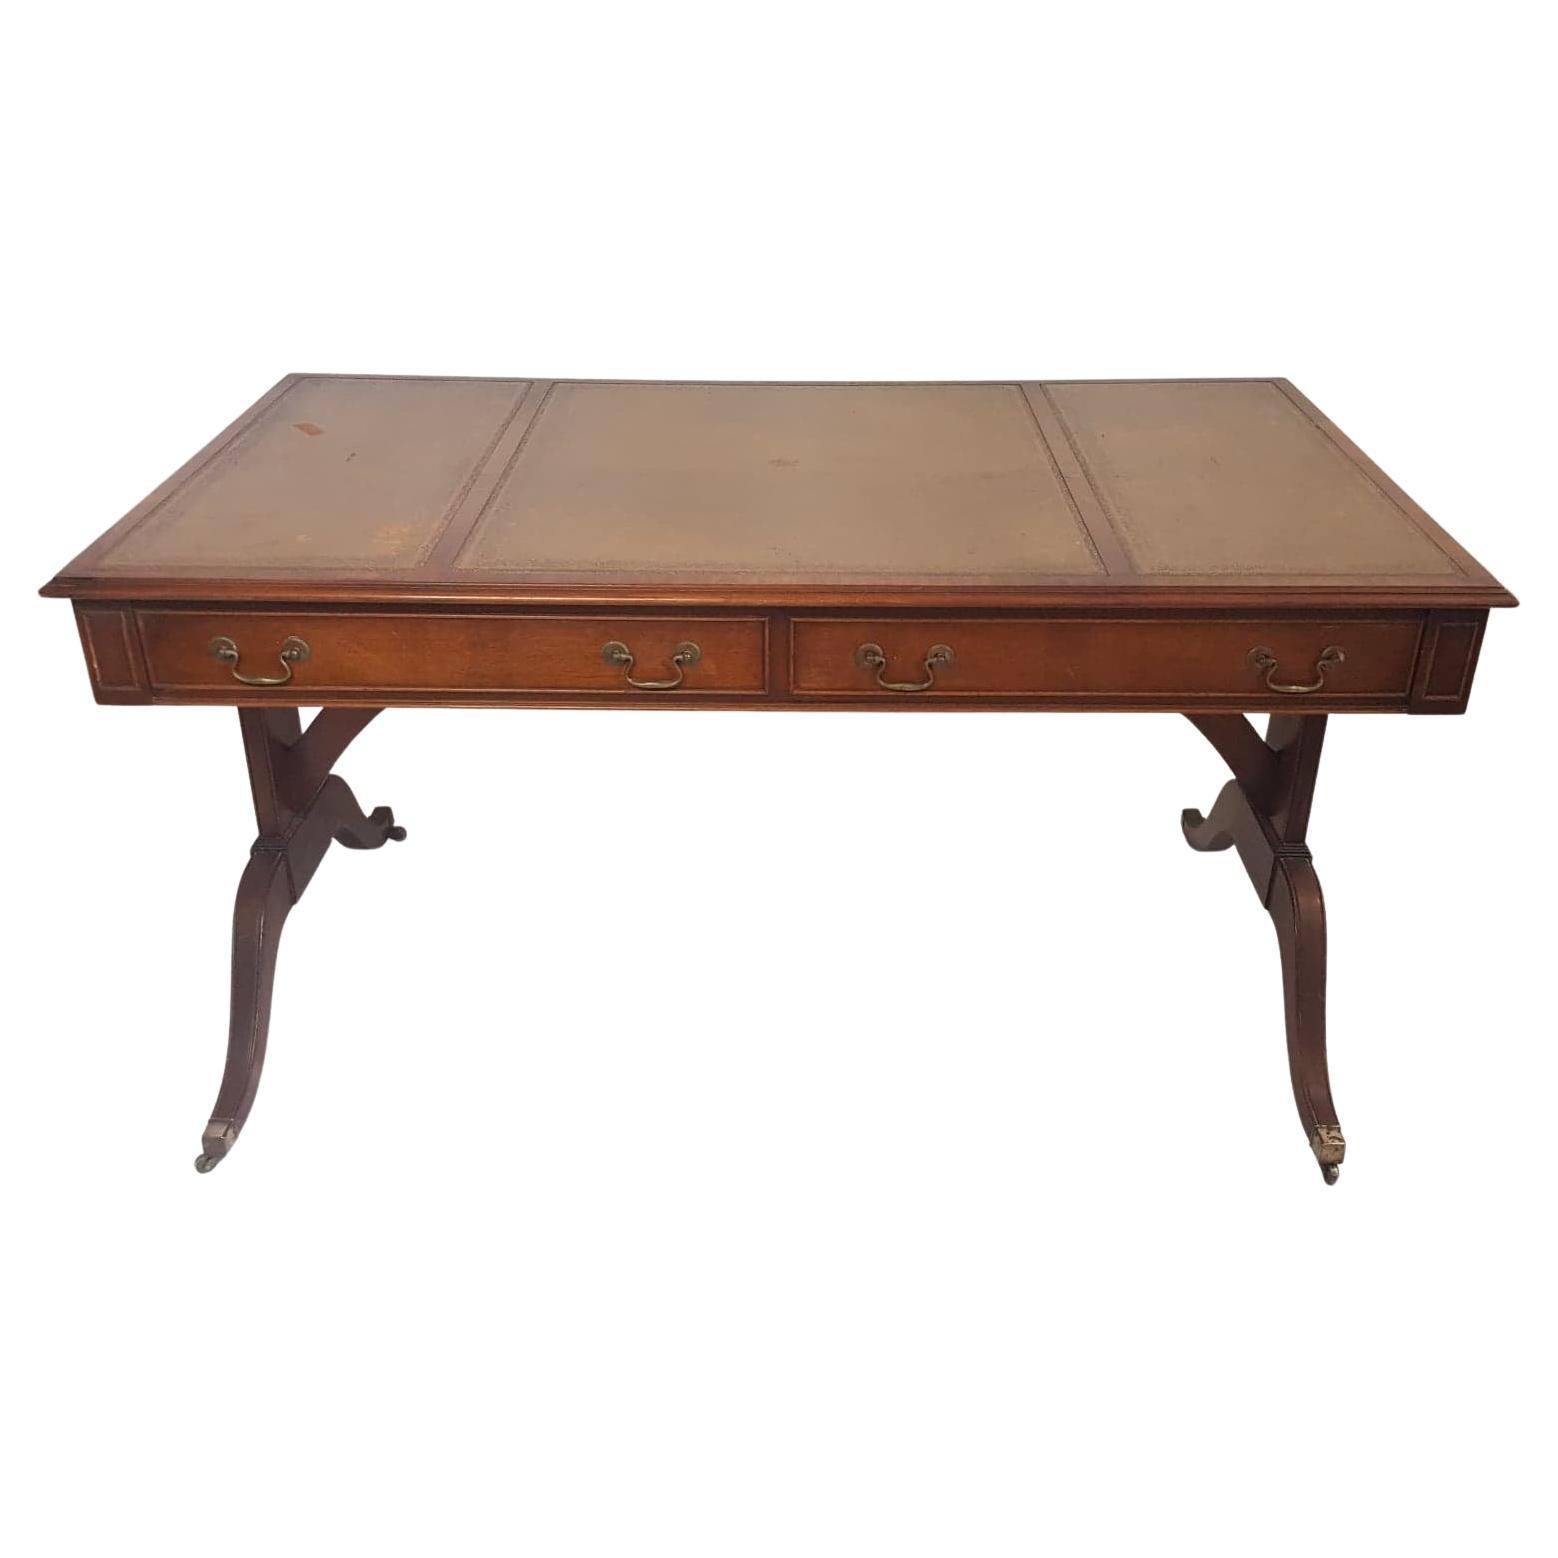 Large Leather Top Mahogany Period Style Writing Table by Reprodux